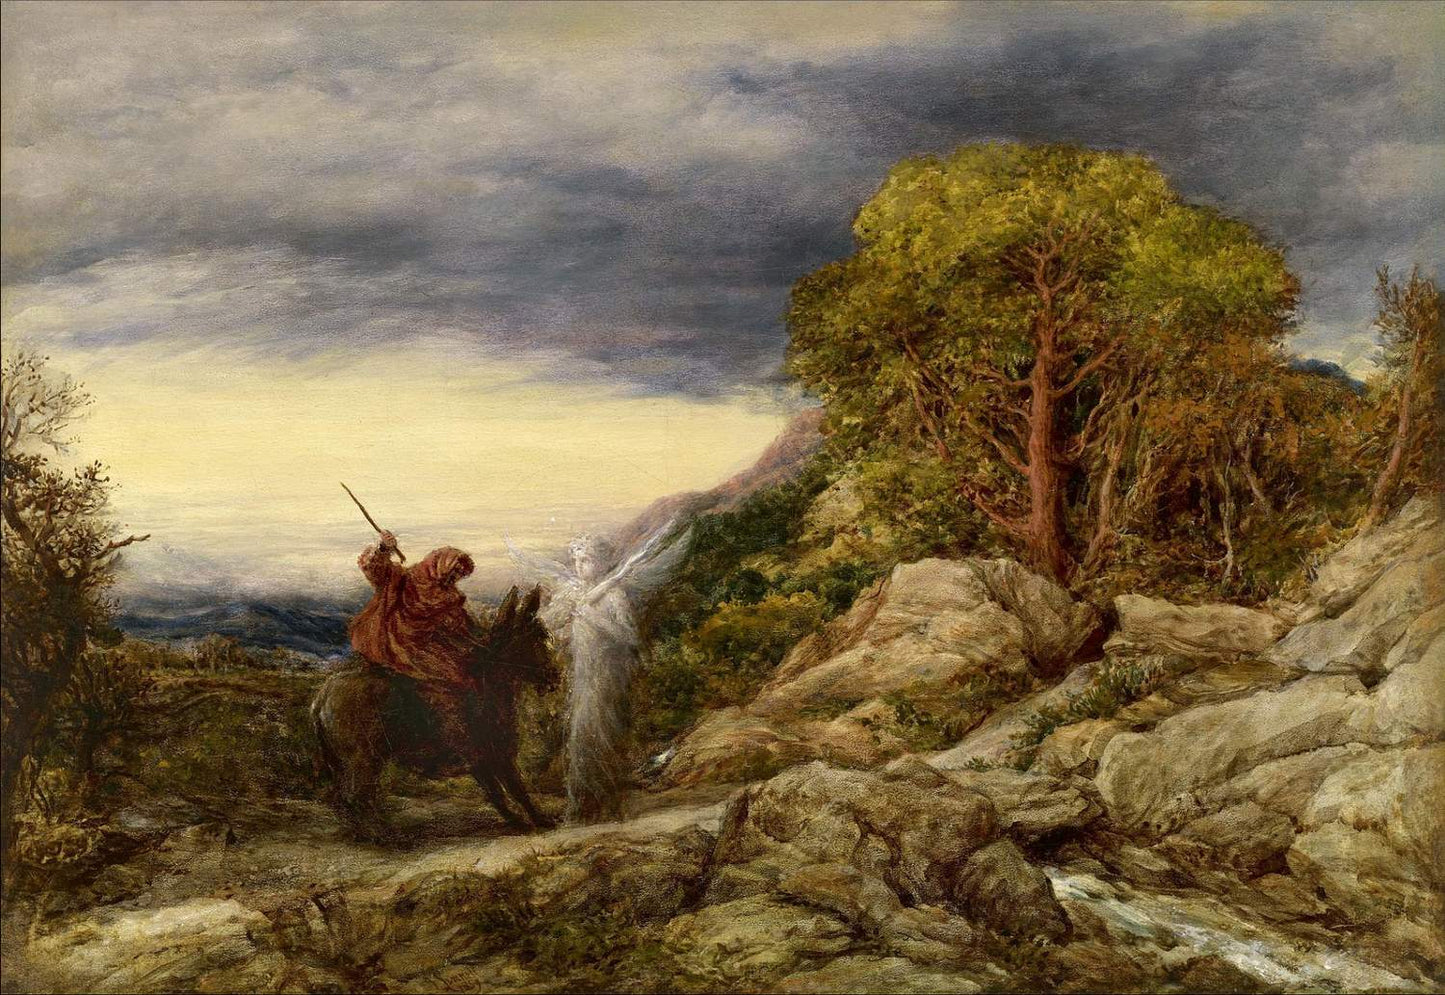 The Prophet Balaam and the Angel, John Linnell